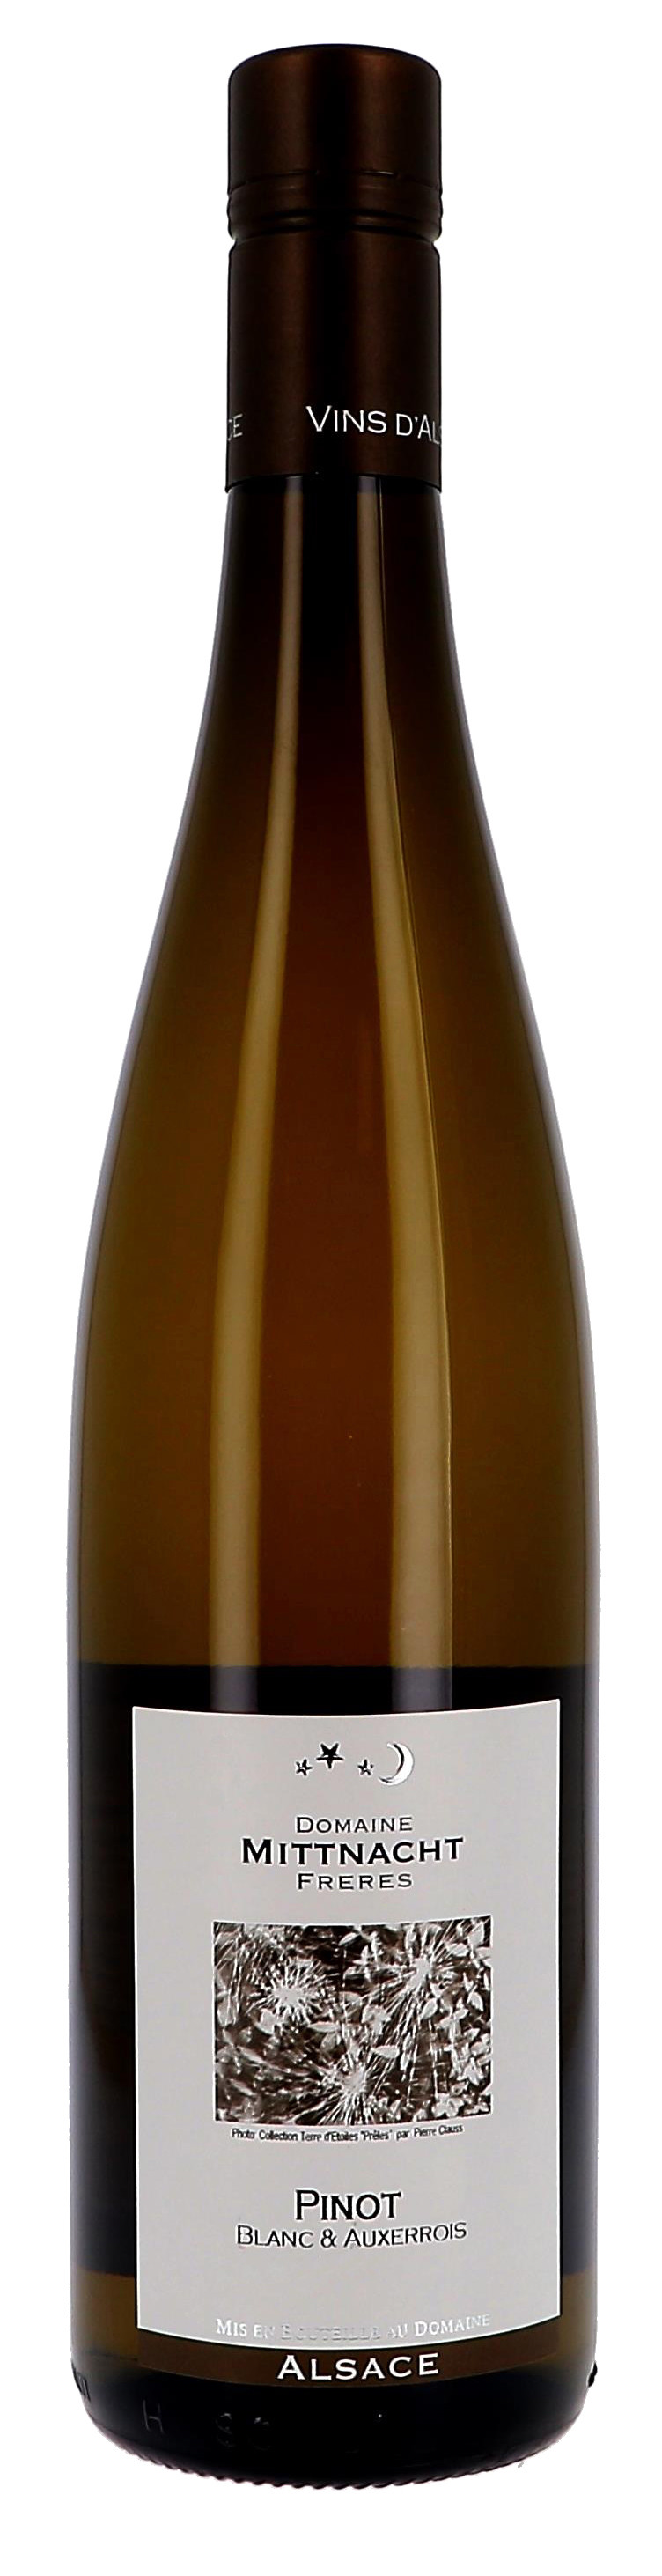 Pinot Blanc & Auxerrois 75cl Domaine Mittnacht Freres